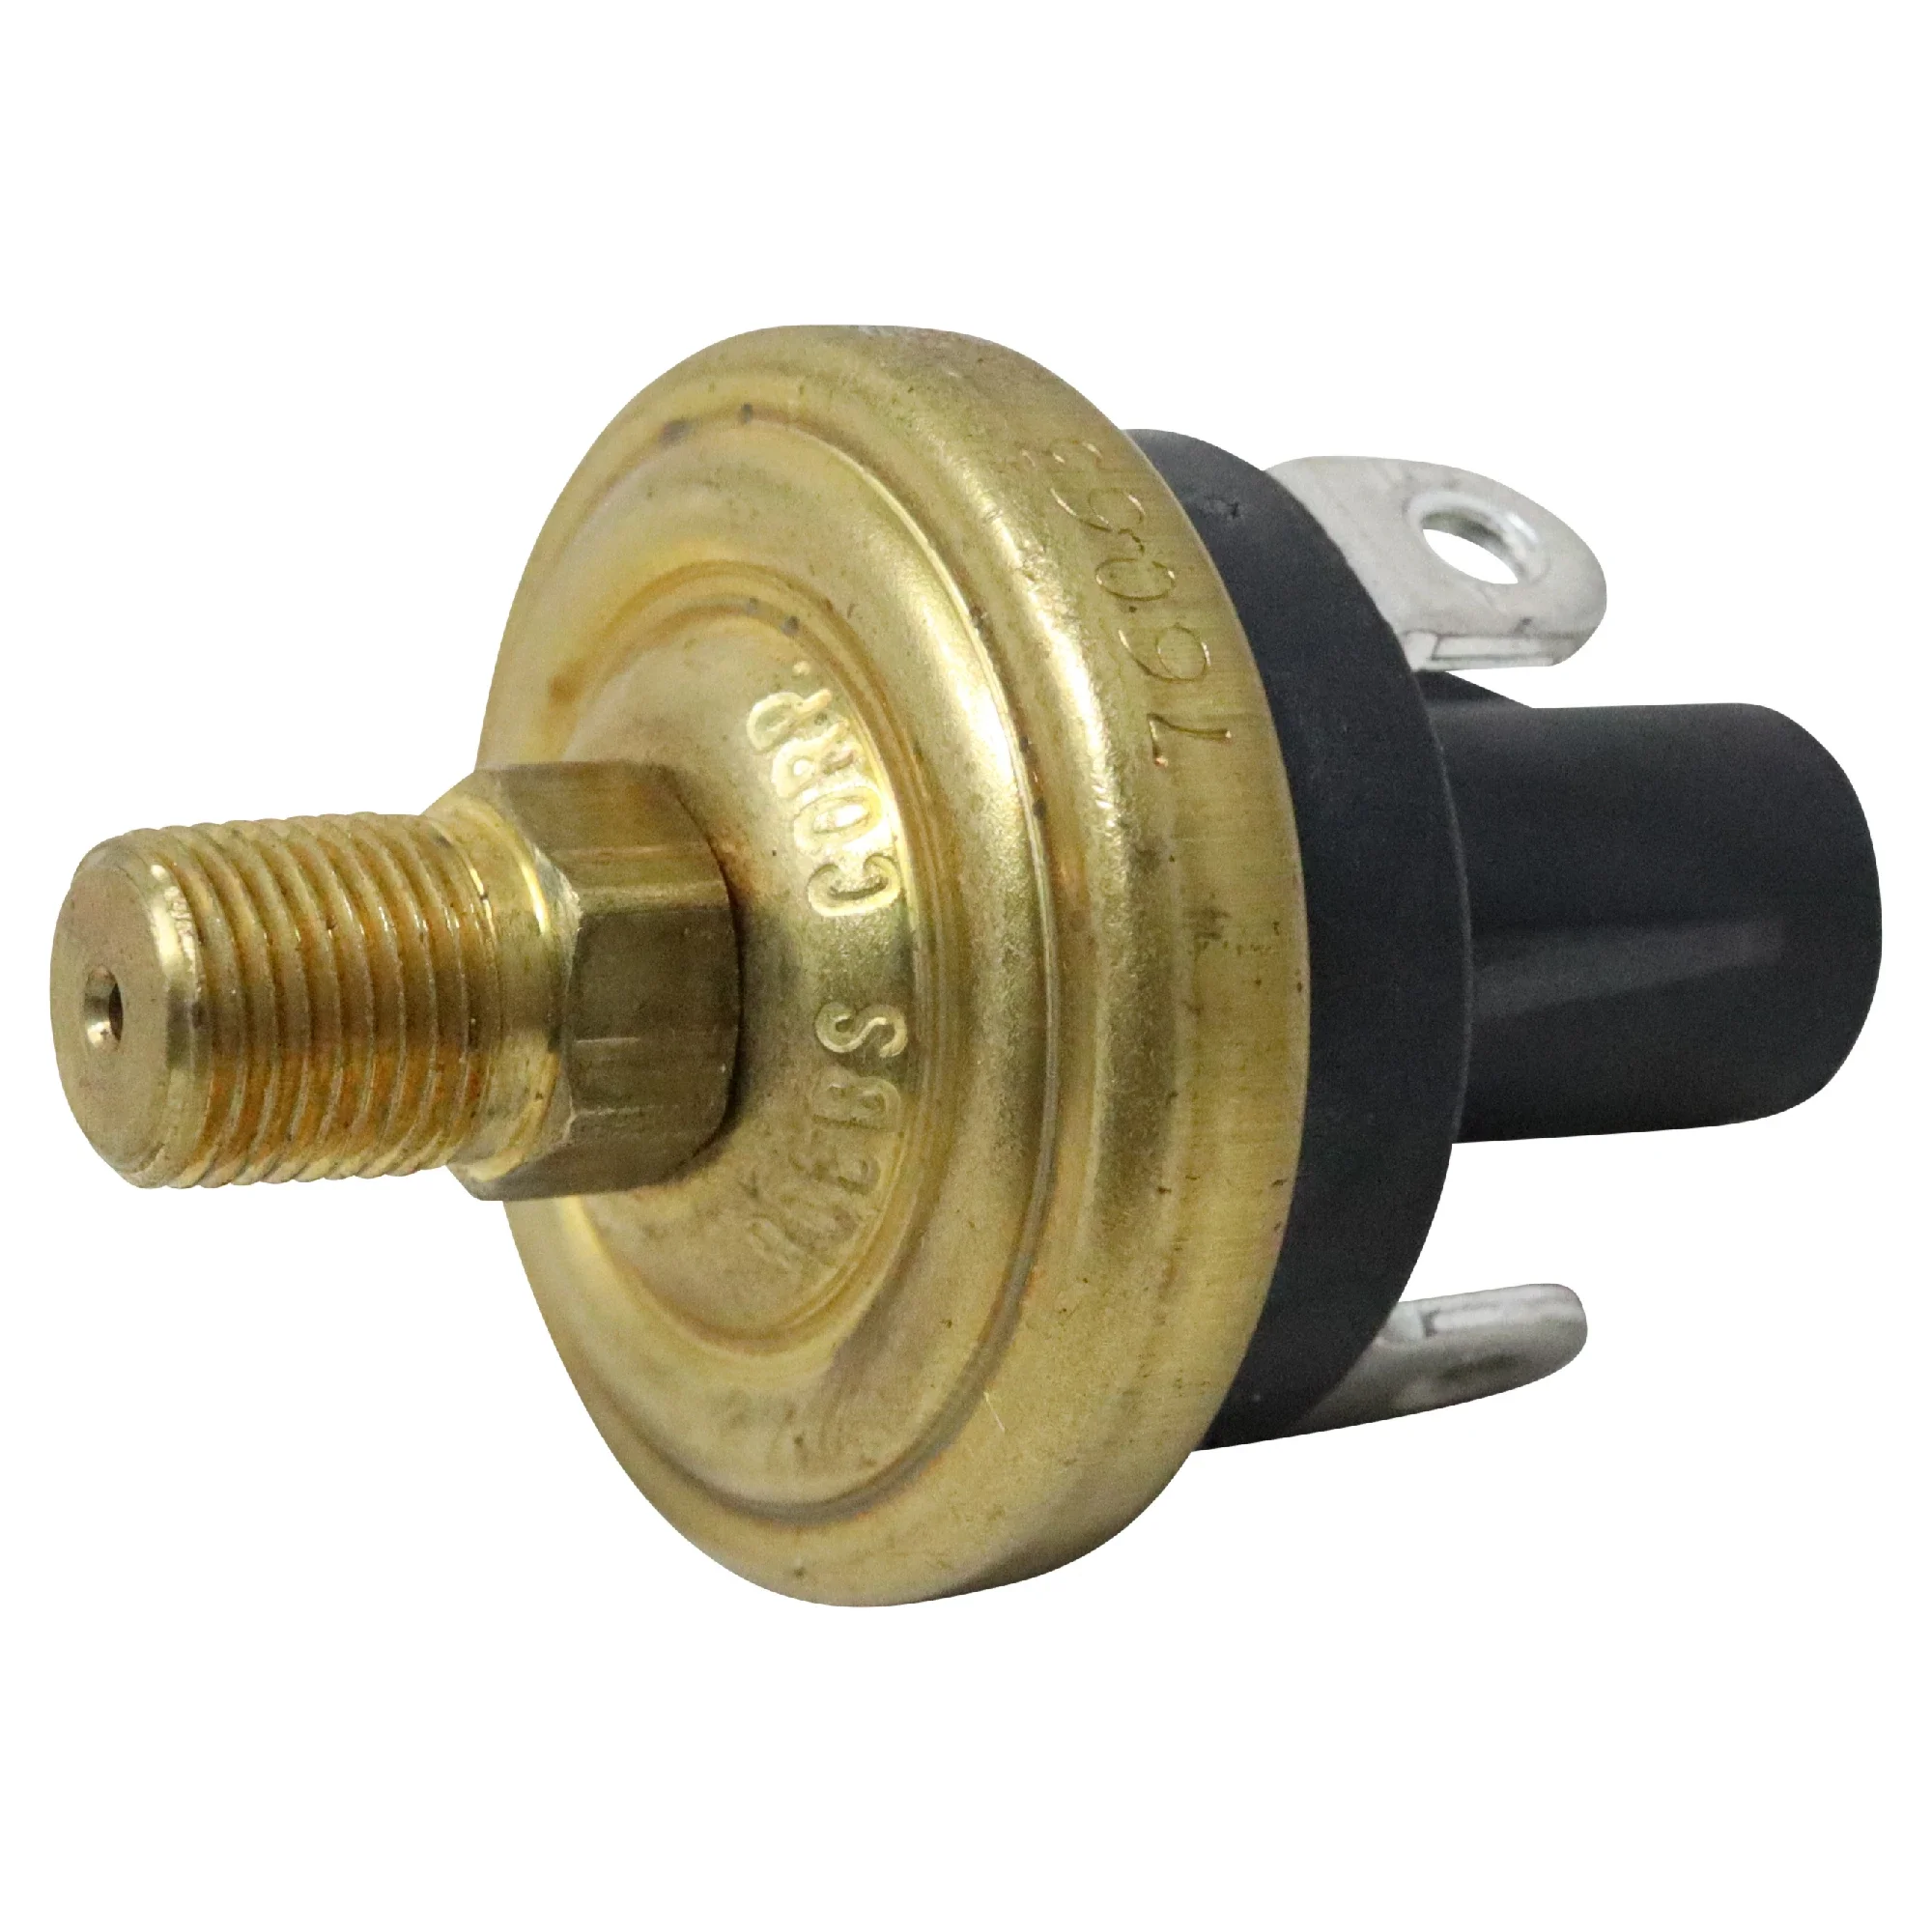 Wastebuilt® Replacement for Heil Pressure Switch (35 PSI)